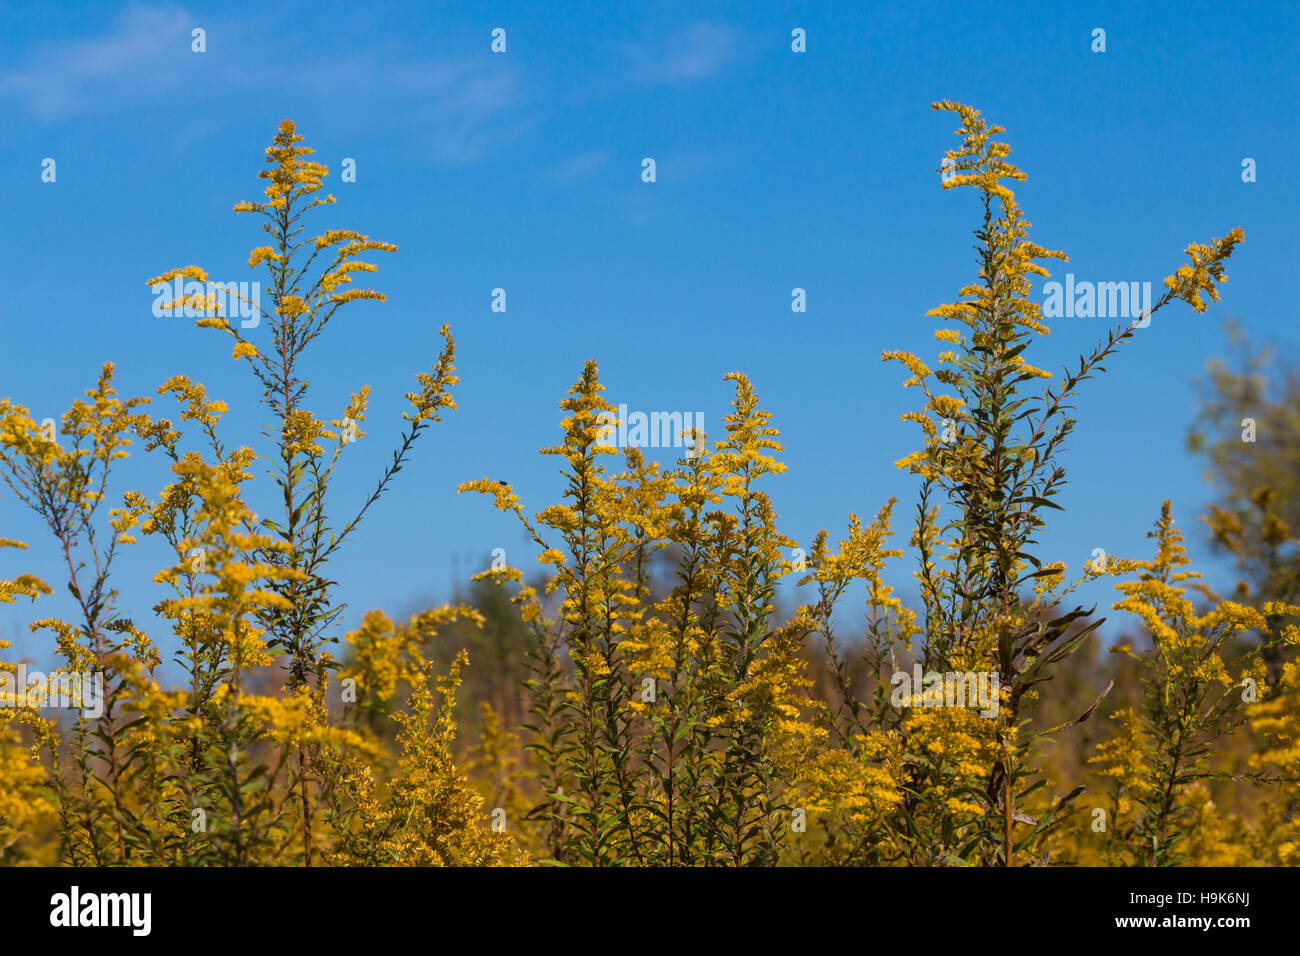 Goldenrods (Solidago sp.) blooming in a field against the sky, Indiana, United States Stock Photo